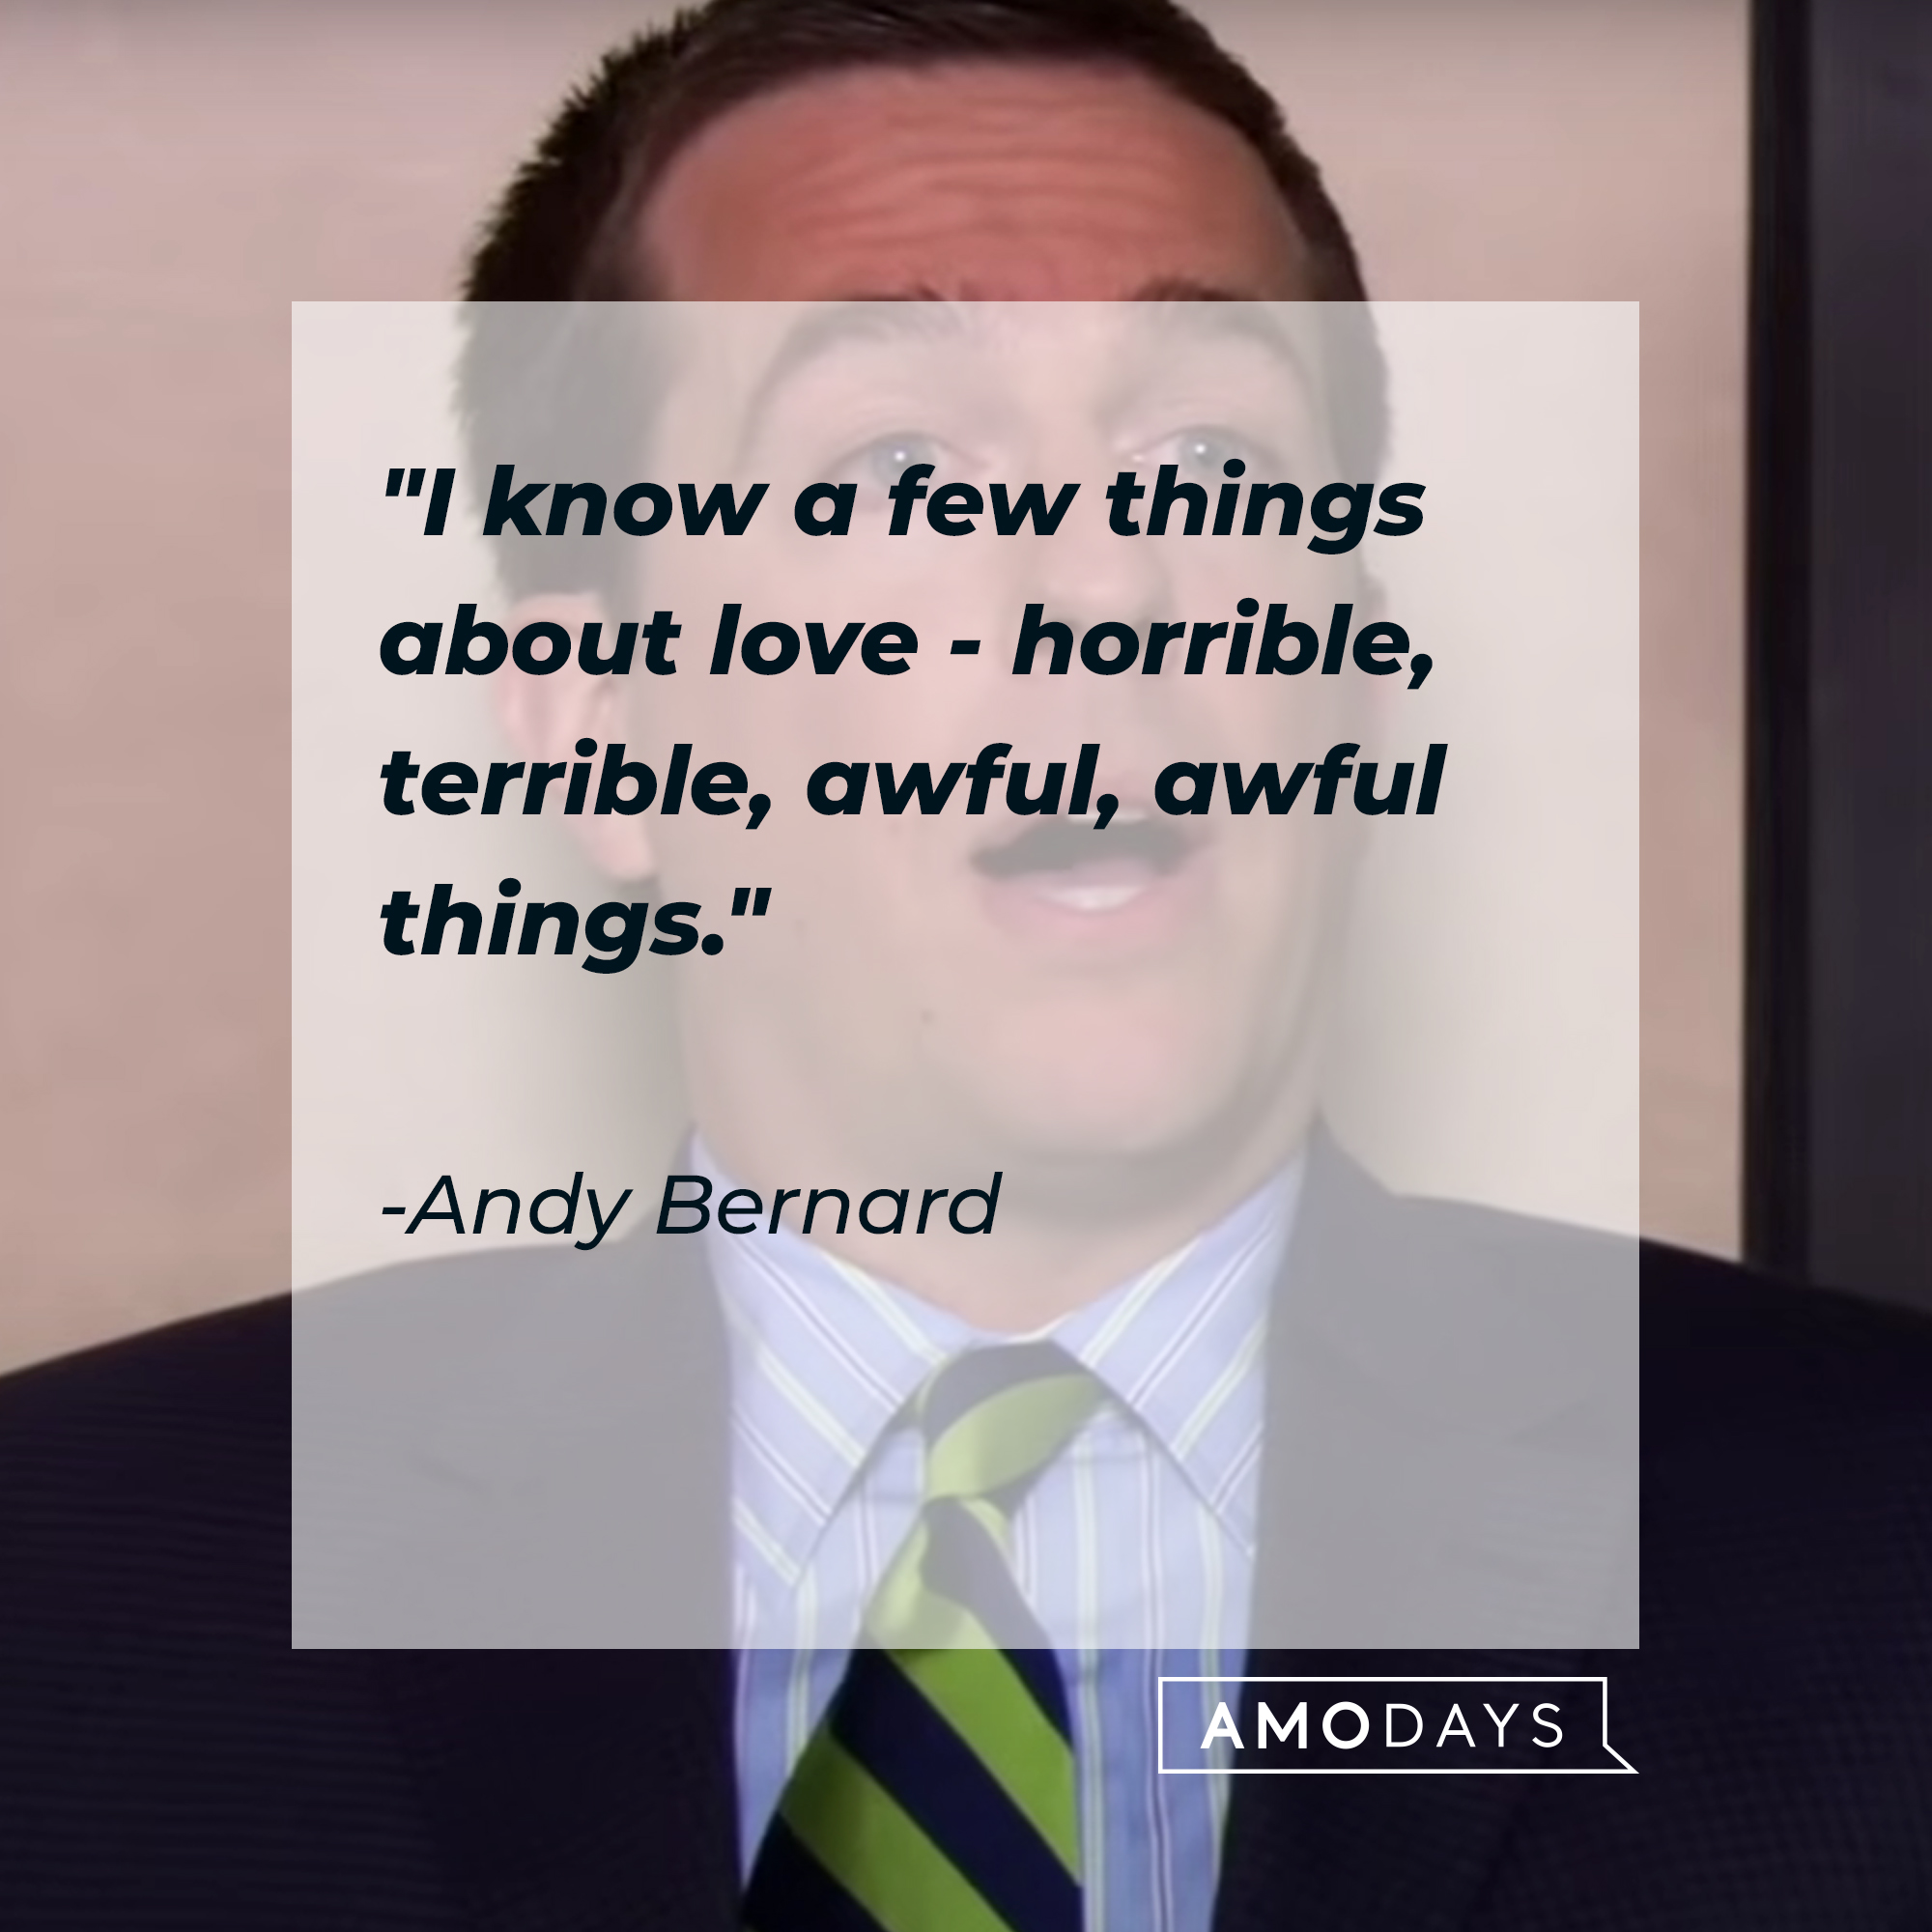 Andy Bernard's quote: "I know a few things about love—horrible, terrible, awful, awful things." | Source: YouTube/TheOffice